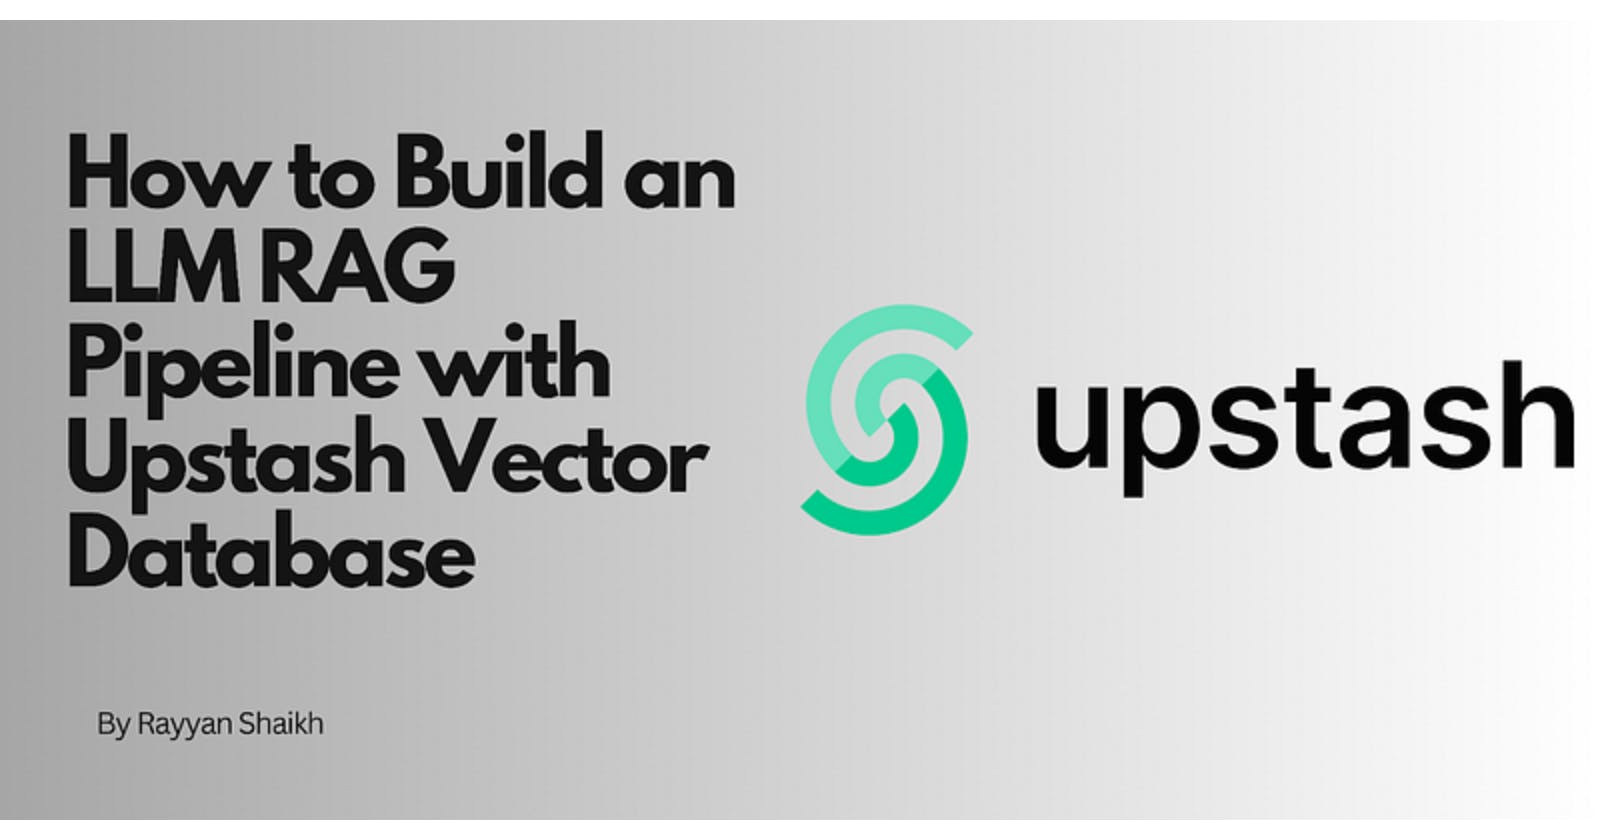 How to Build an LLM RAG Pipeline with Upstash Vector Database